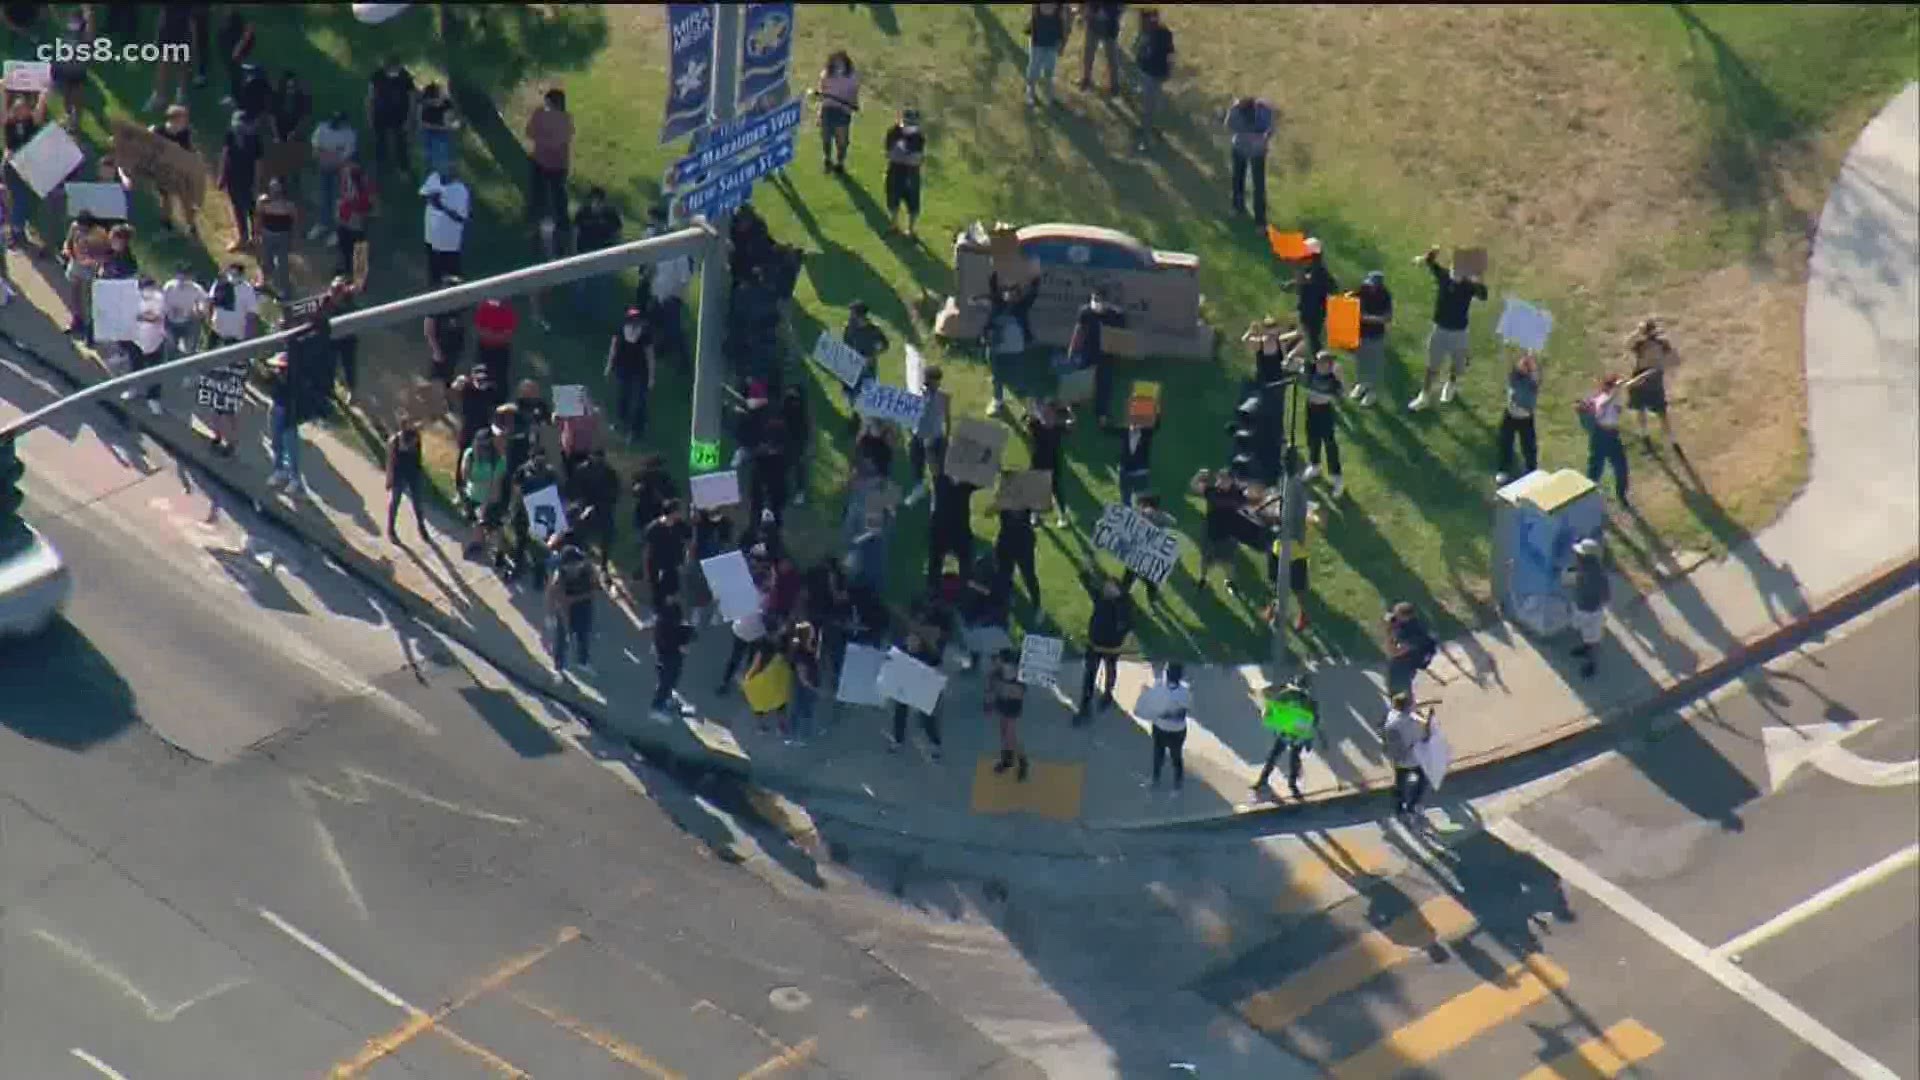 News 8's Kelly Hessedal reports from Mira Mesa as San Diegans protest over the death of George Floyd